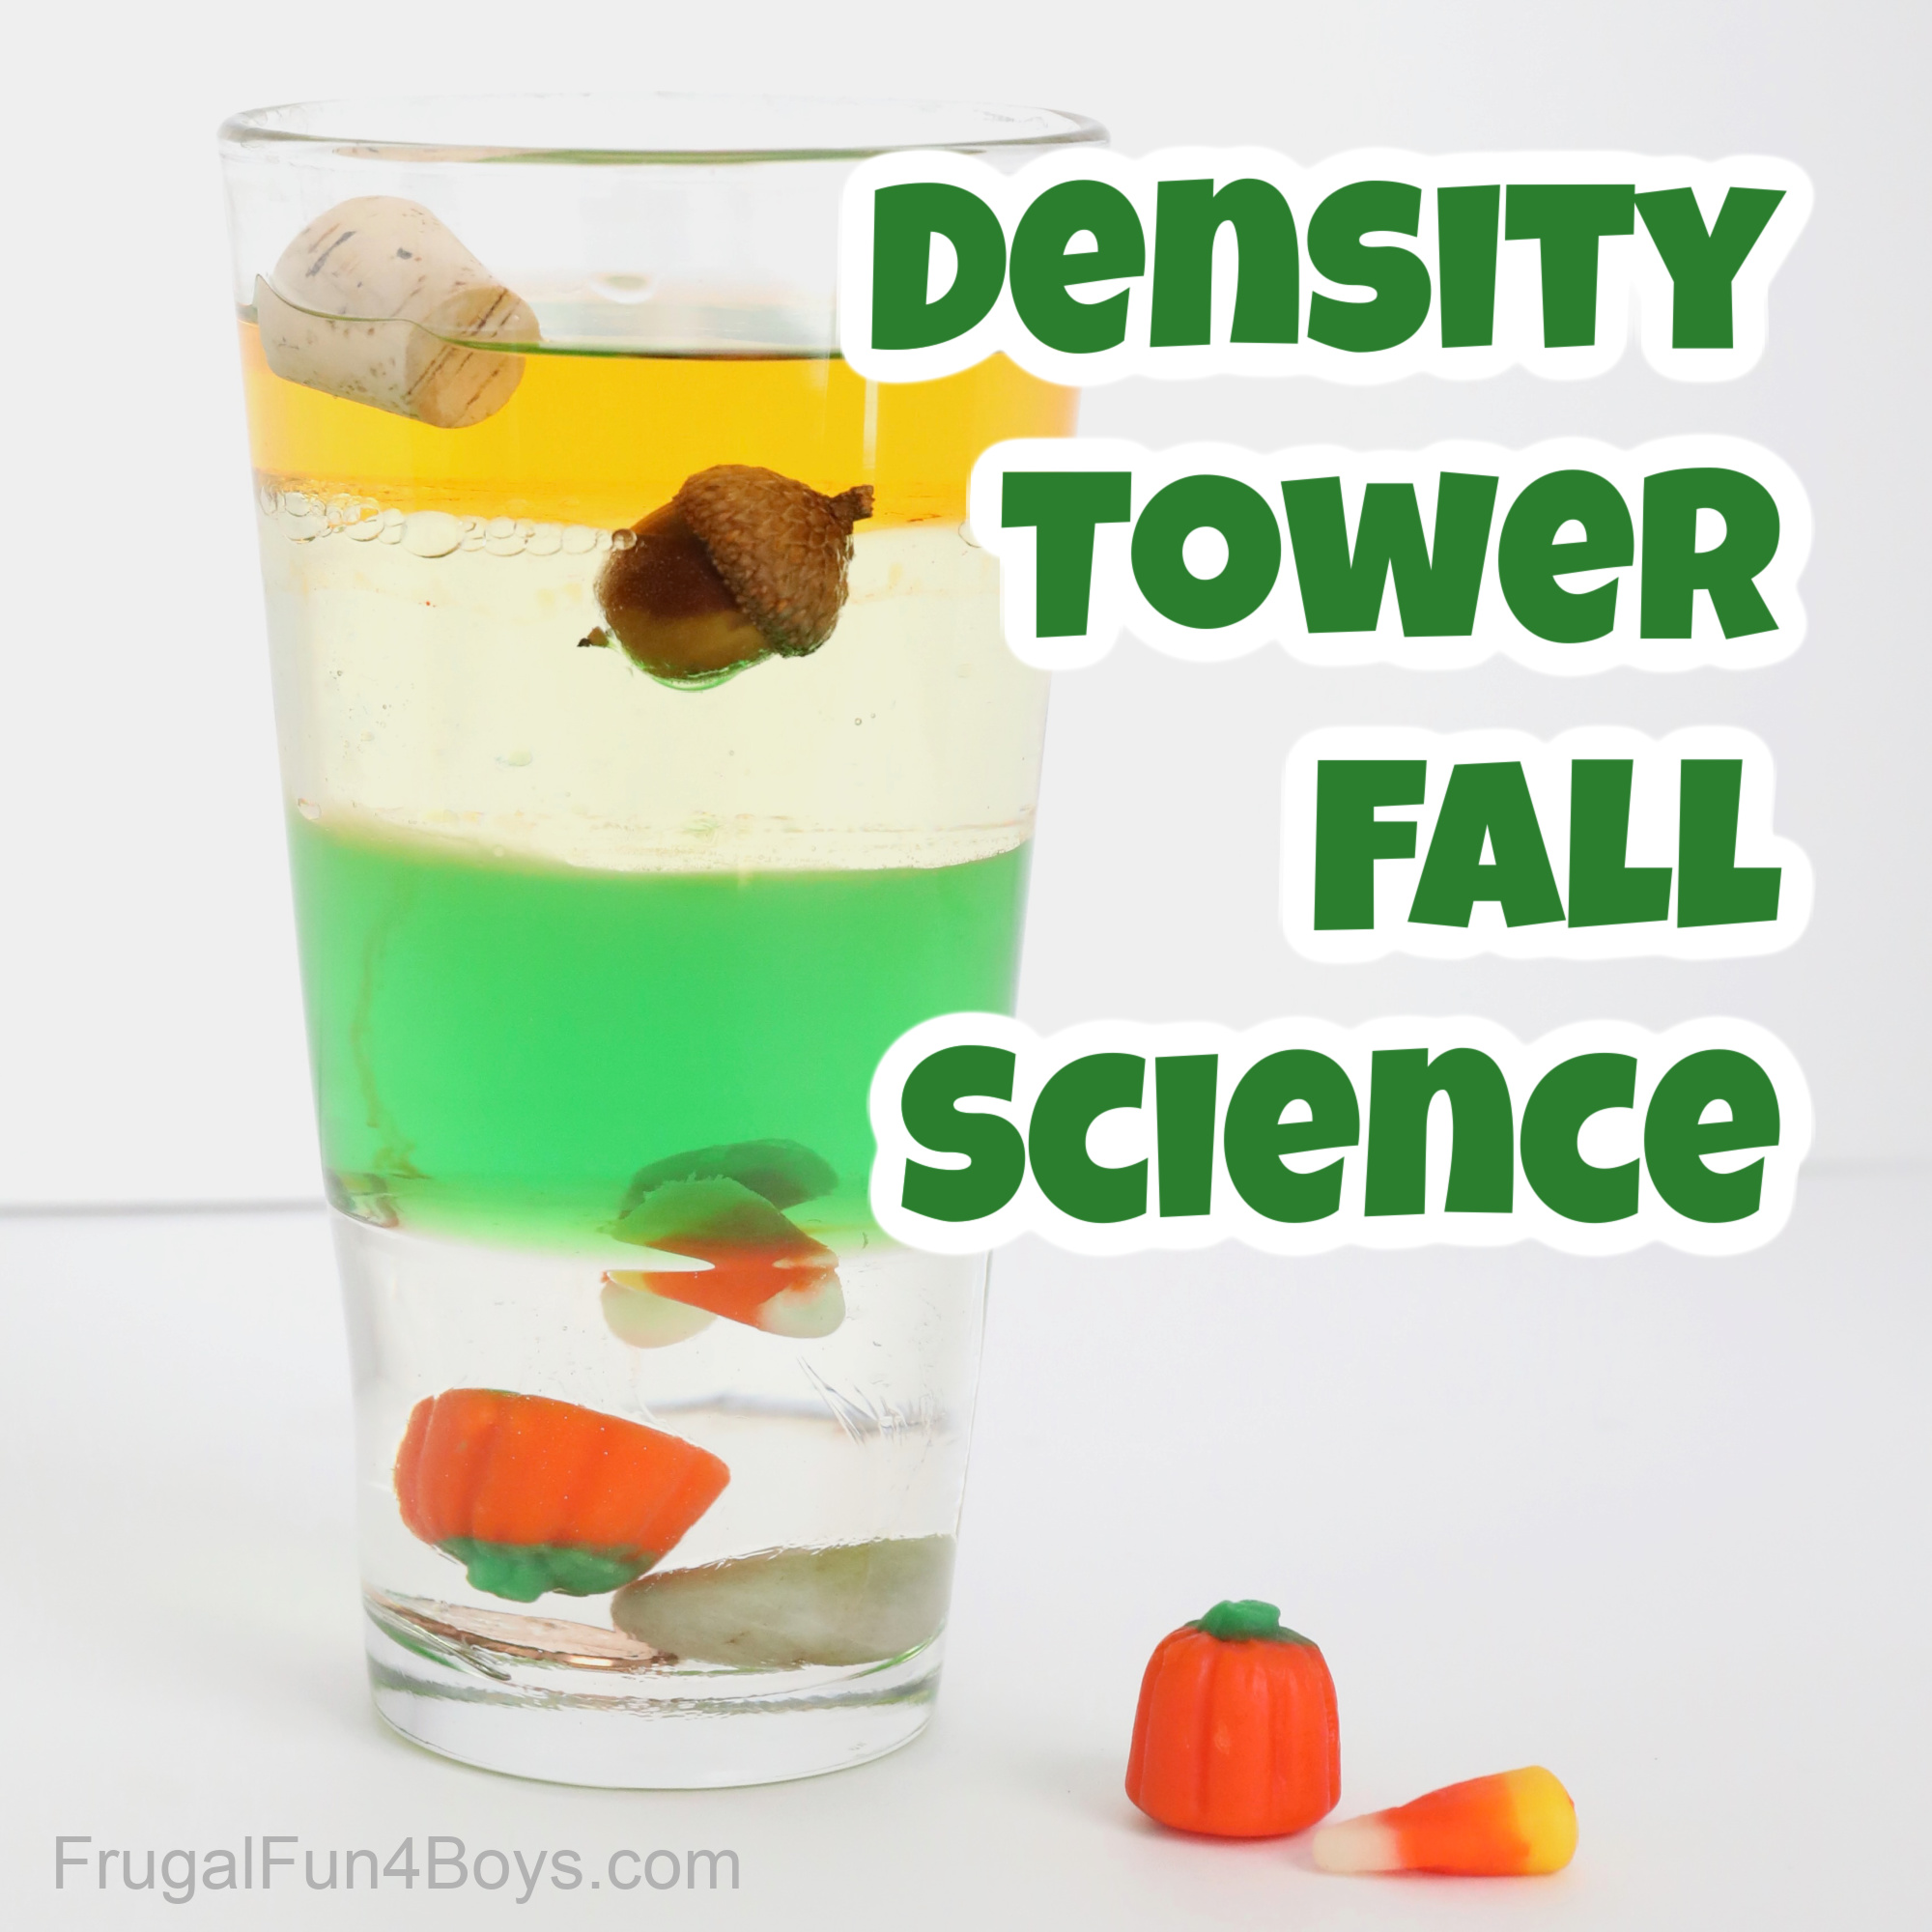 Density tower science experiment with a fun fall theme